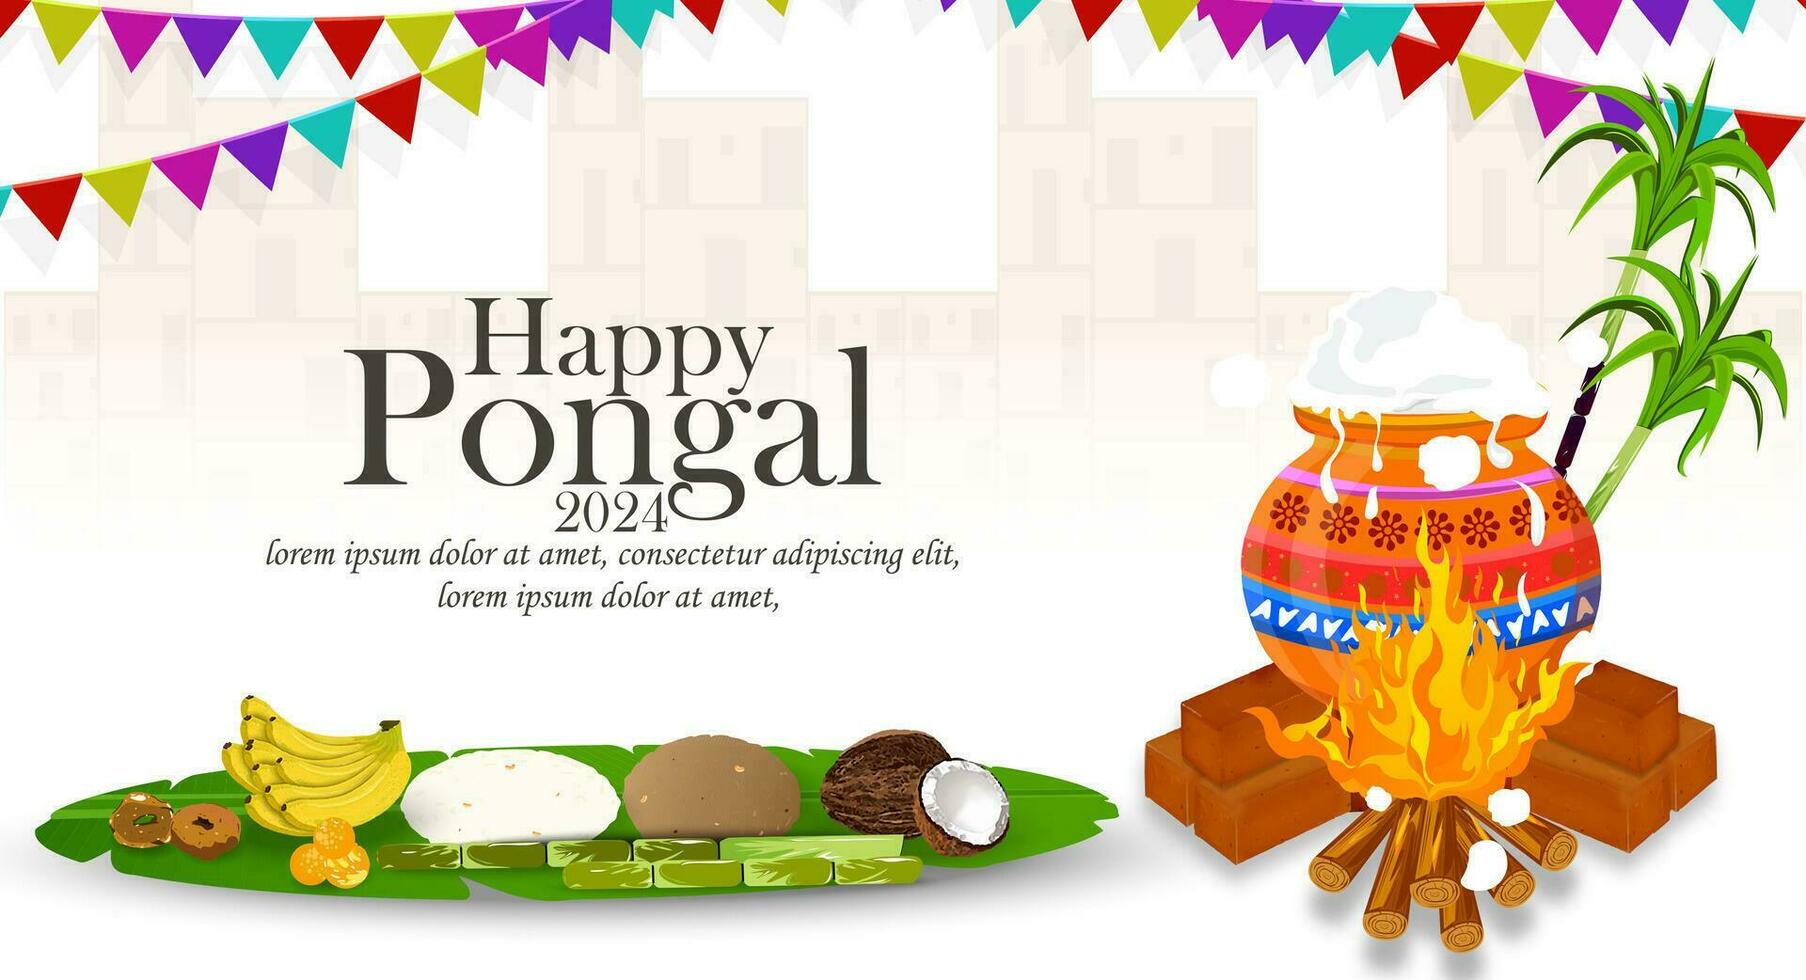 Happy Pongal Festival of India banner design template with traditional food. Vector illustration